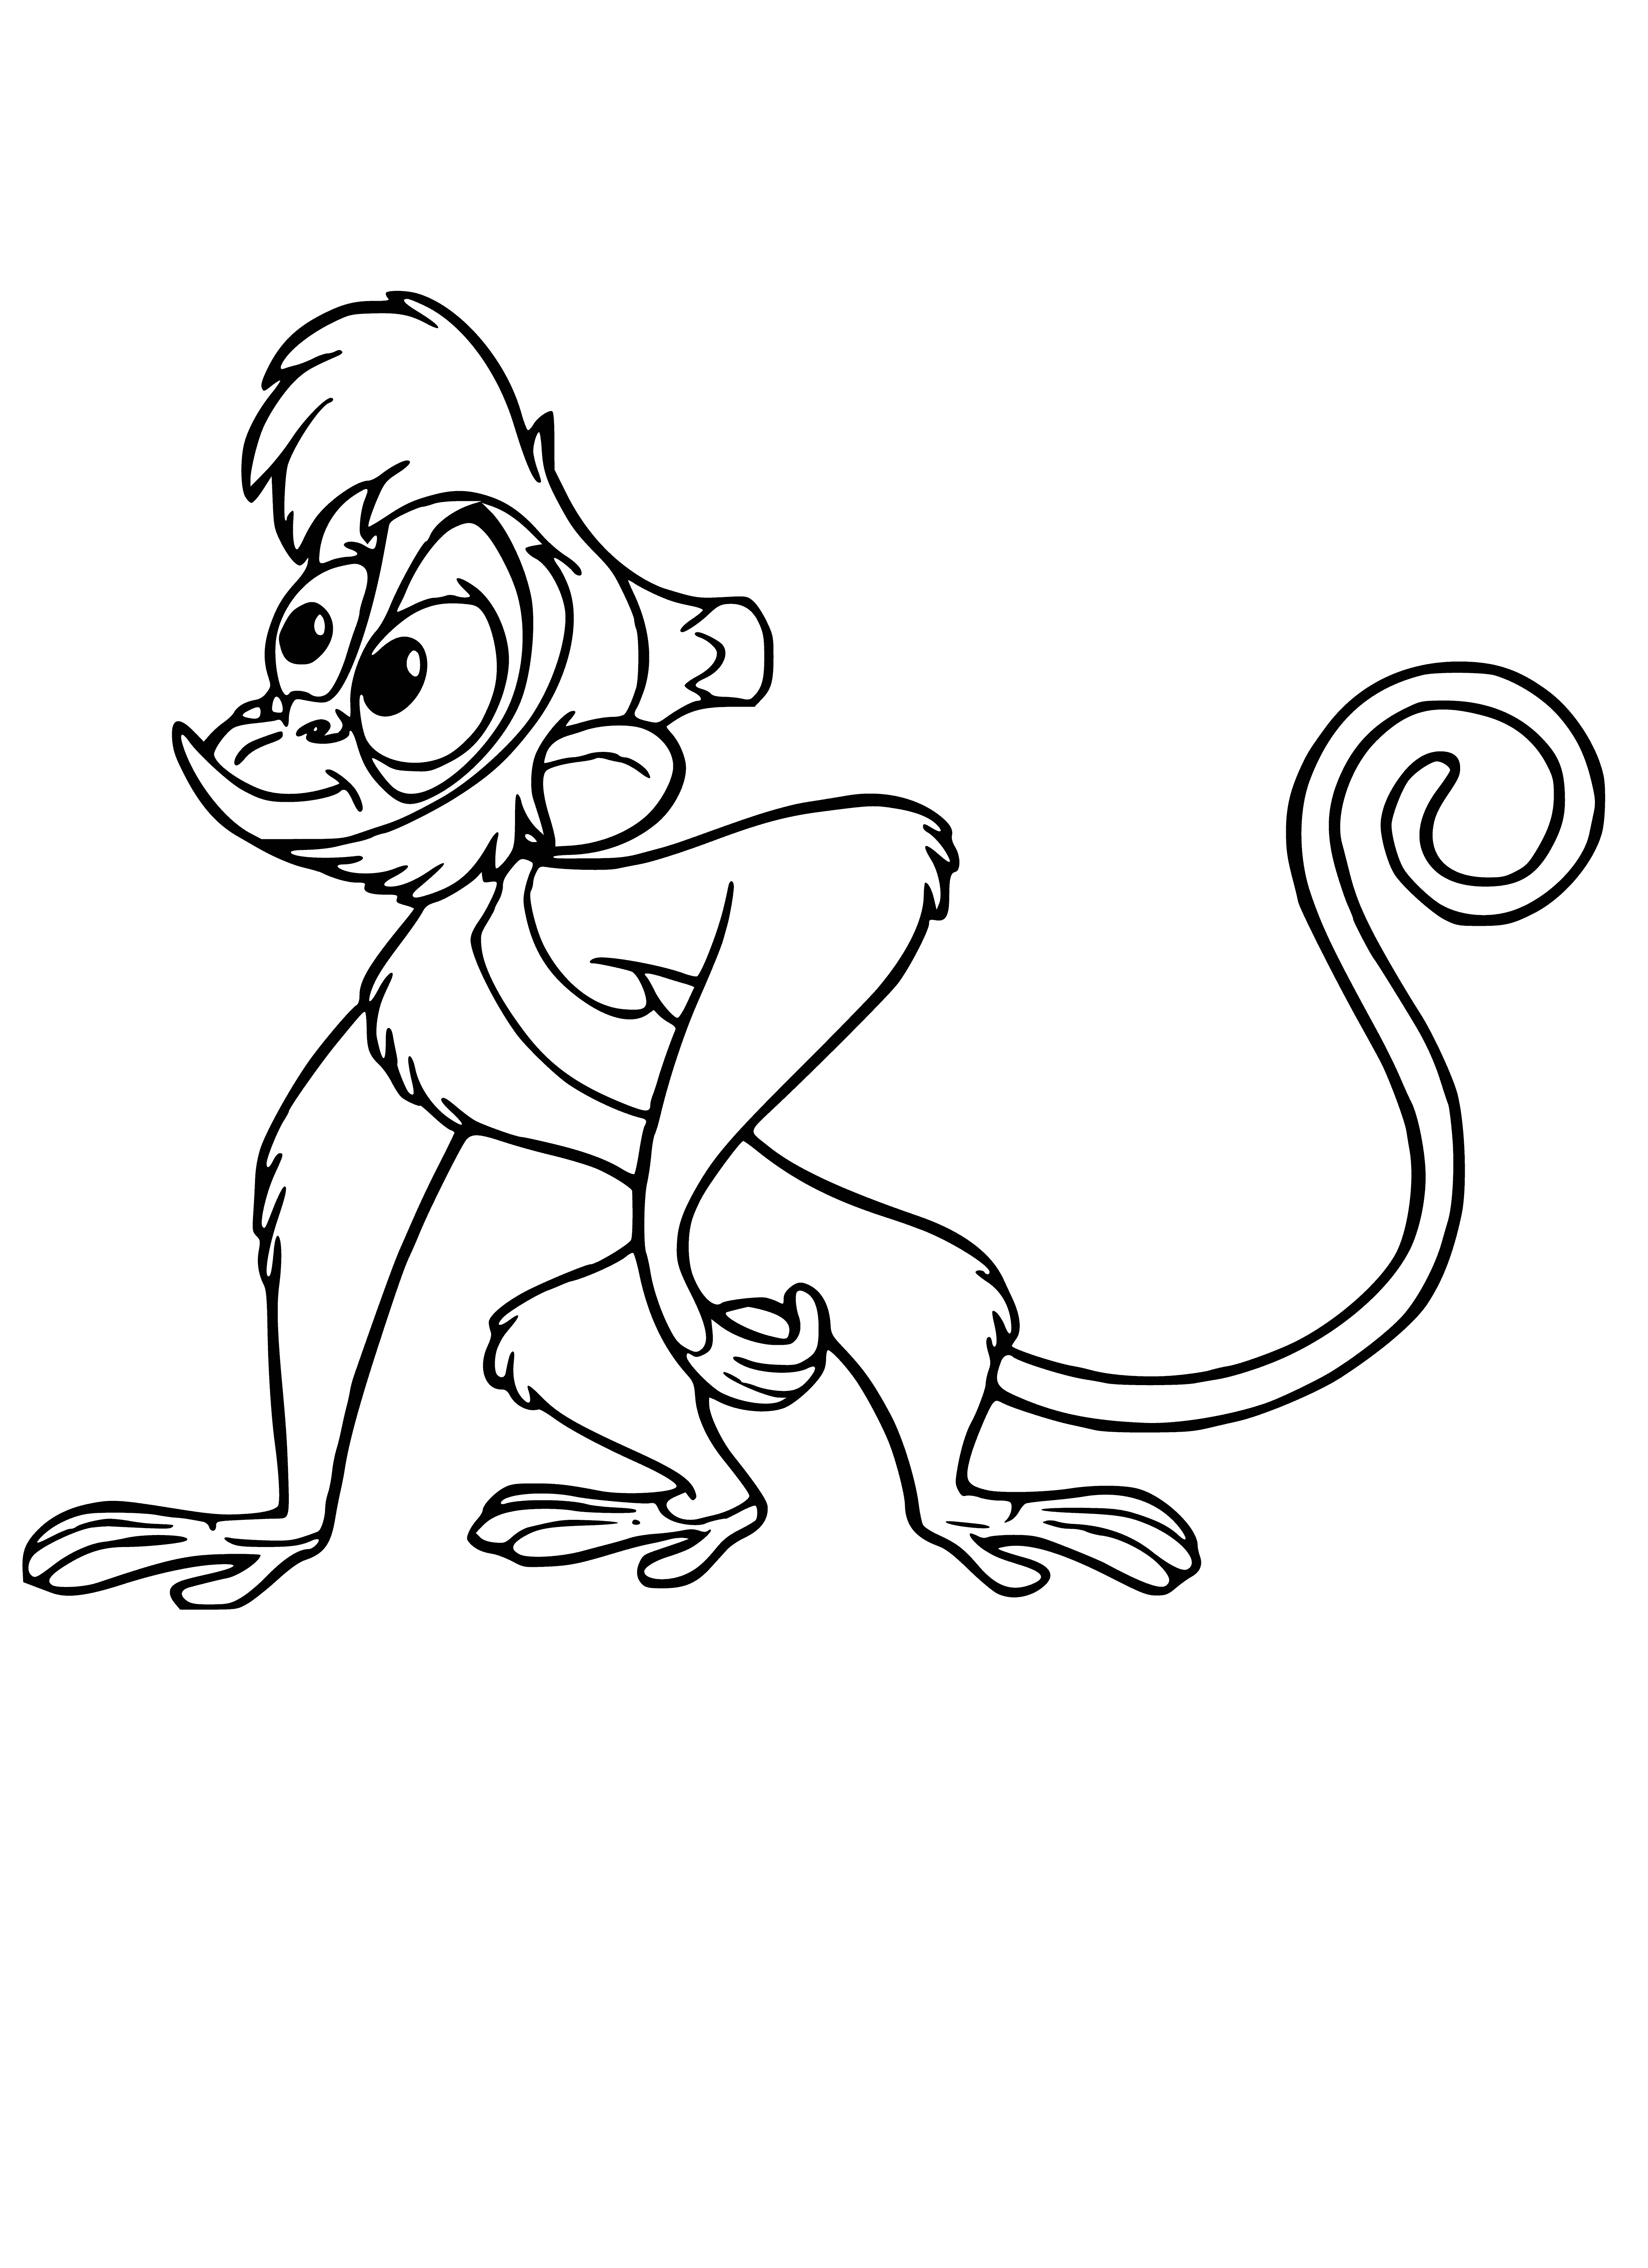 coloring page: Monkey holds knife & spoon, wearing blue & white scarf.